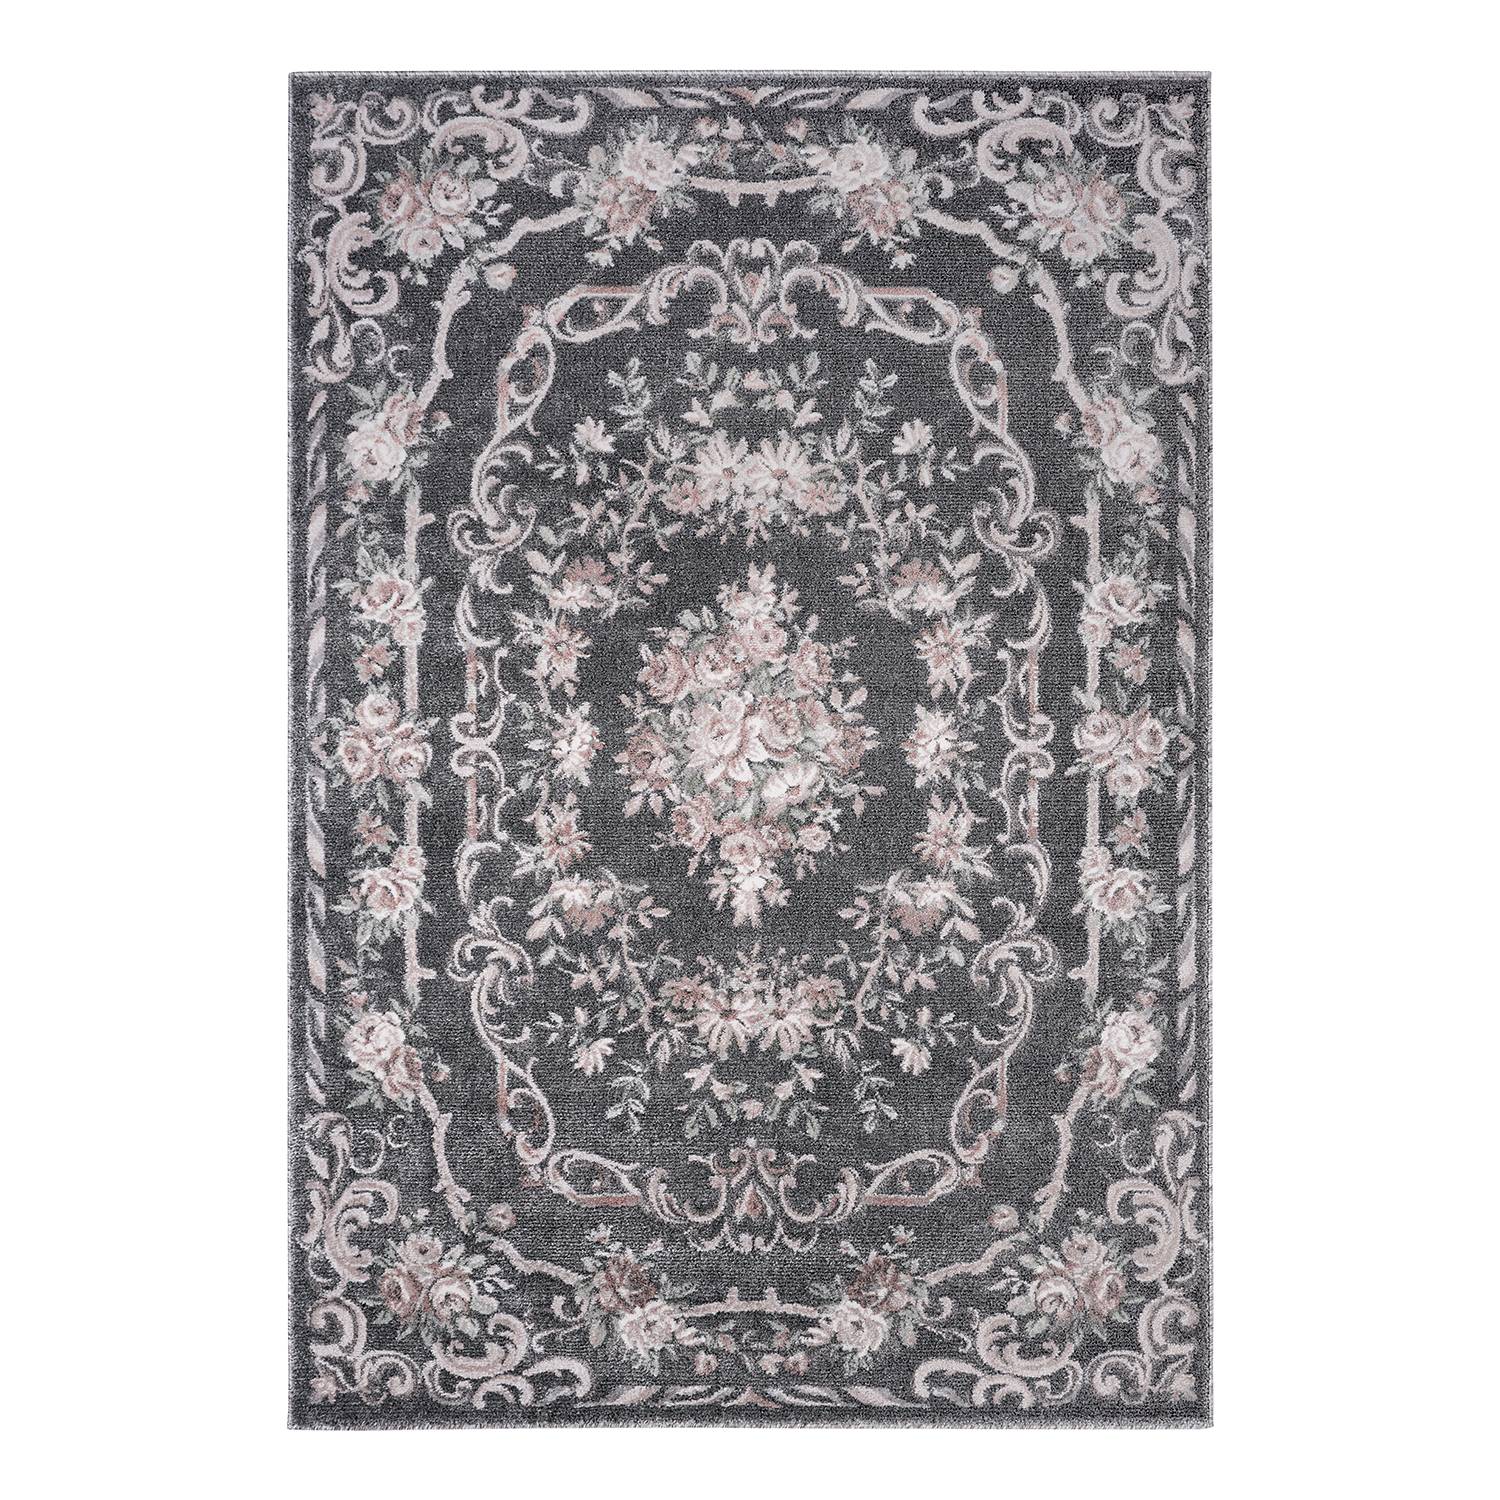 Image of Tapis Aubusson Flore 000000001000244234